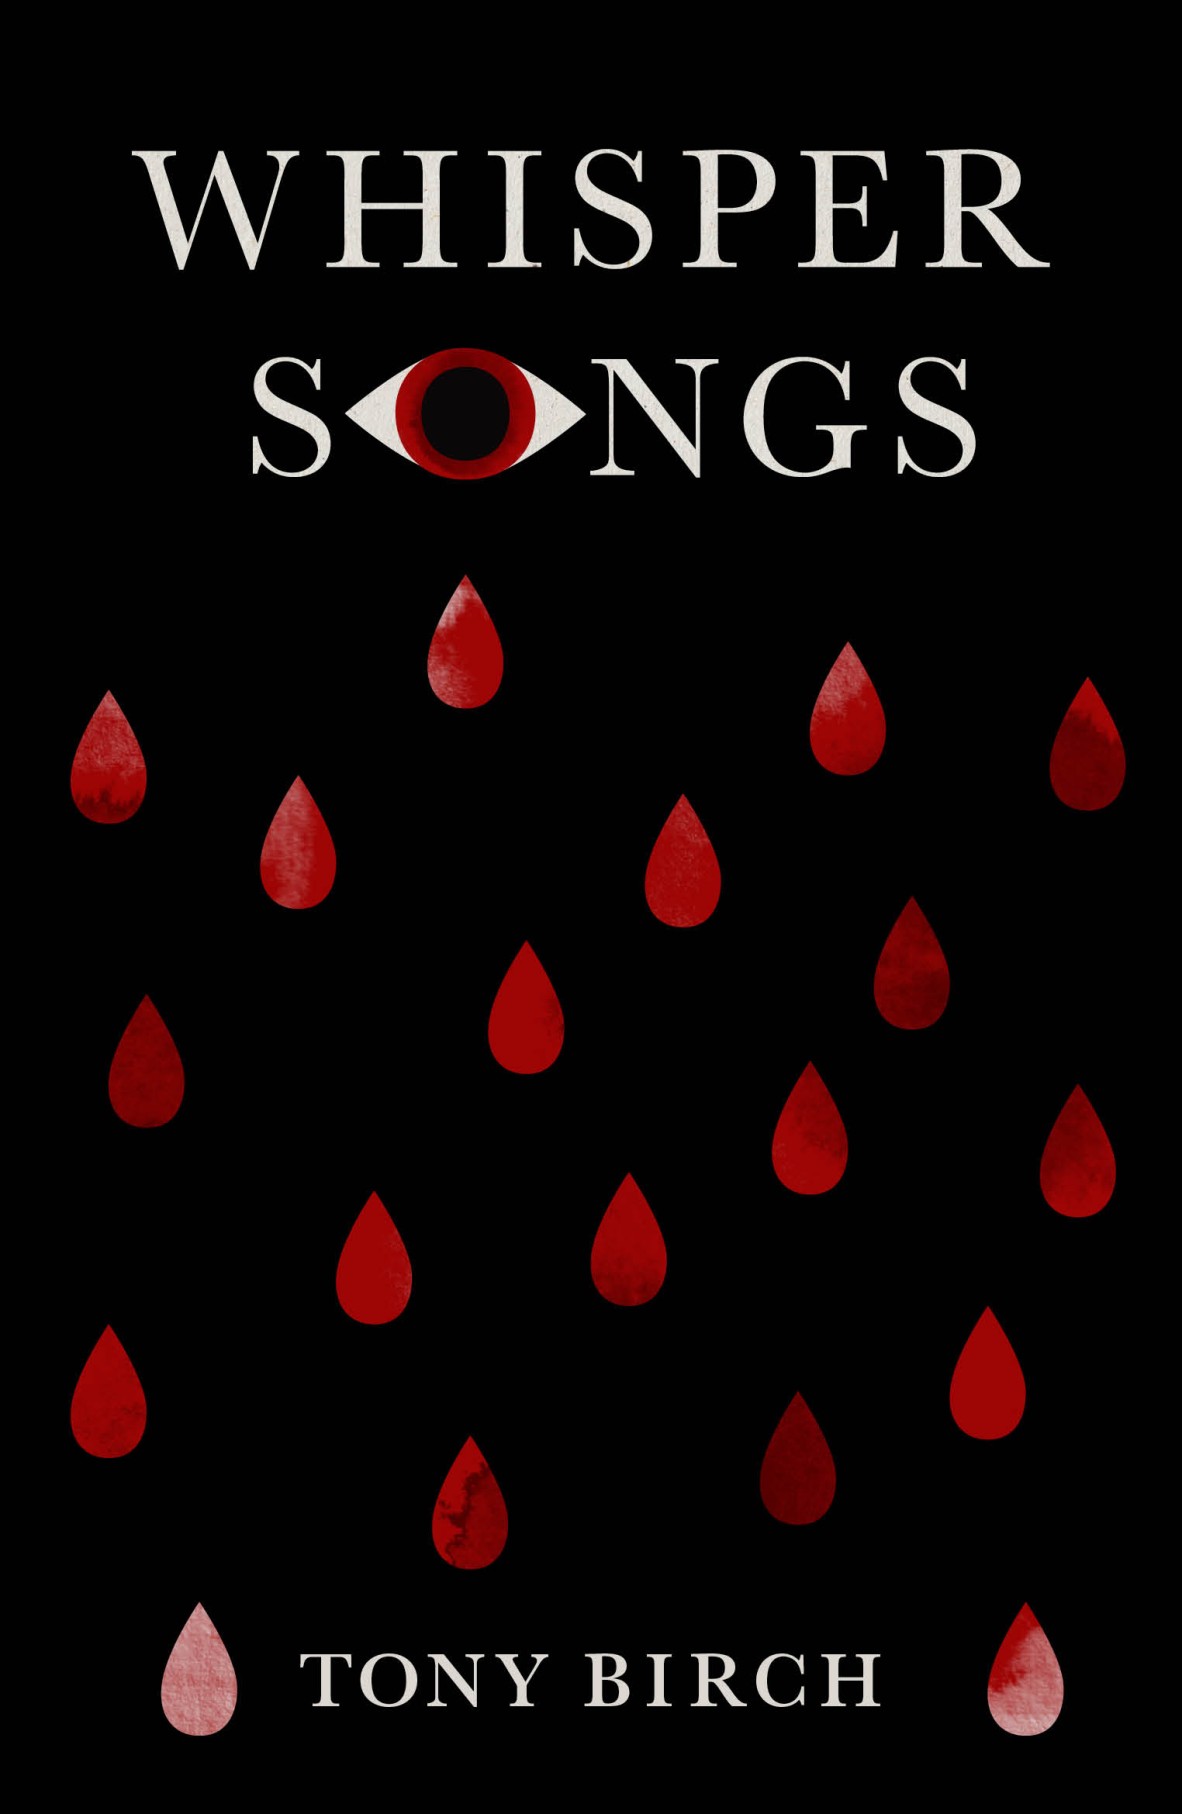 Whisper Songs by Tony Birch - the cover is black with red tear drops or rain drops plus one eye watching